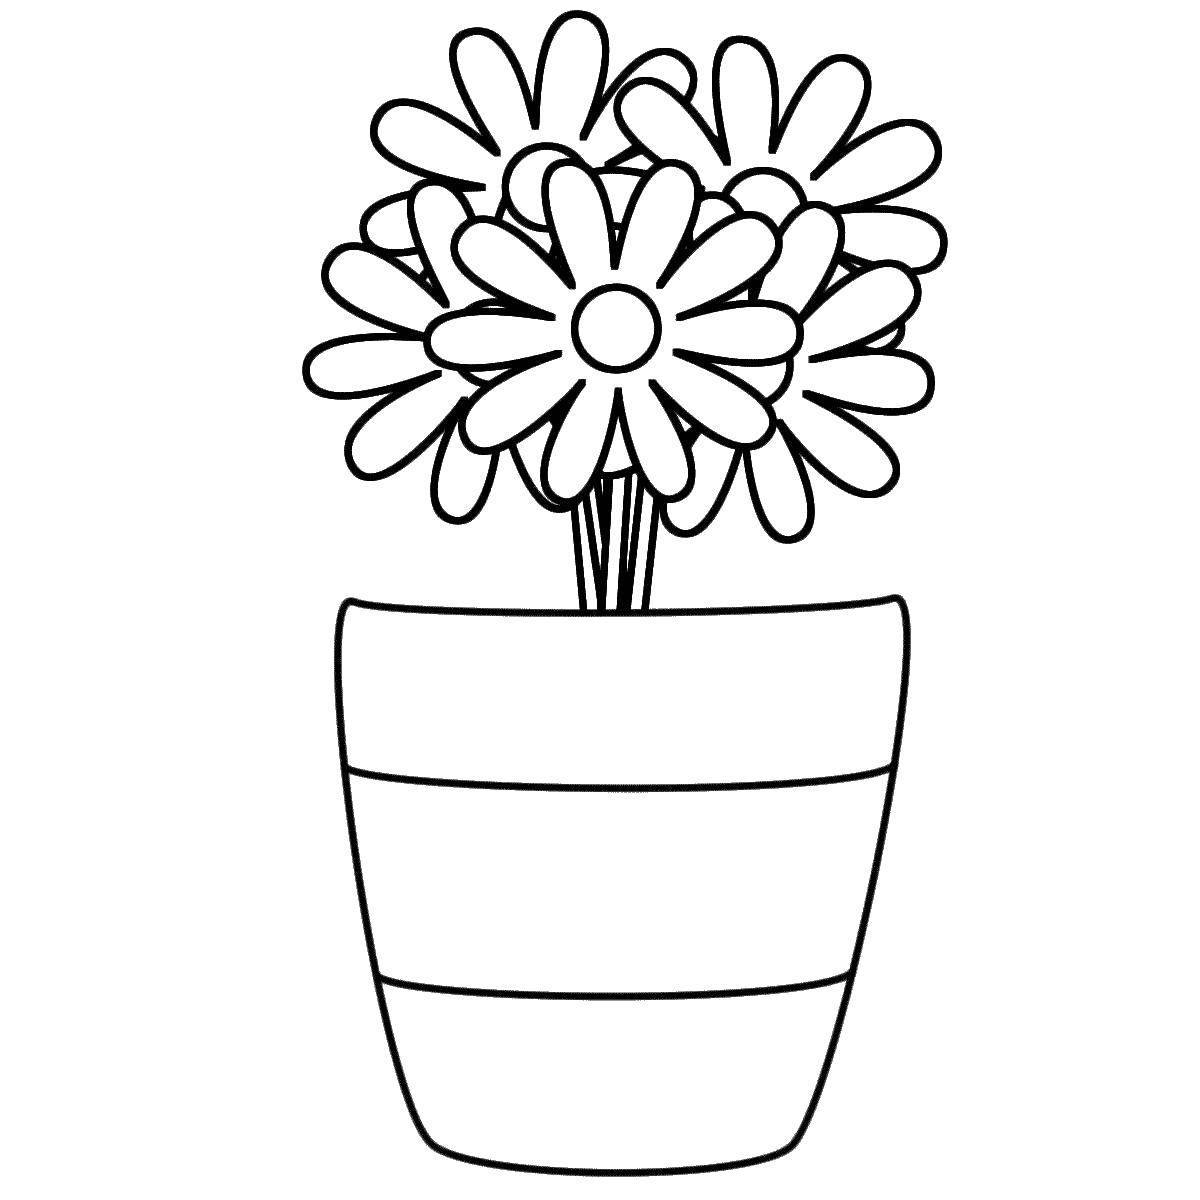 Coloring Simple flowers in a vase. Category Vase. Tags:  Flowers, bouquet, vase.